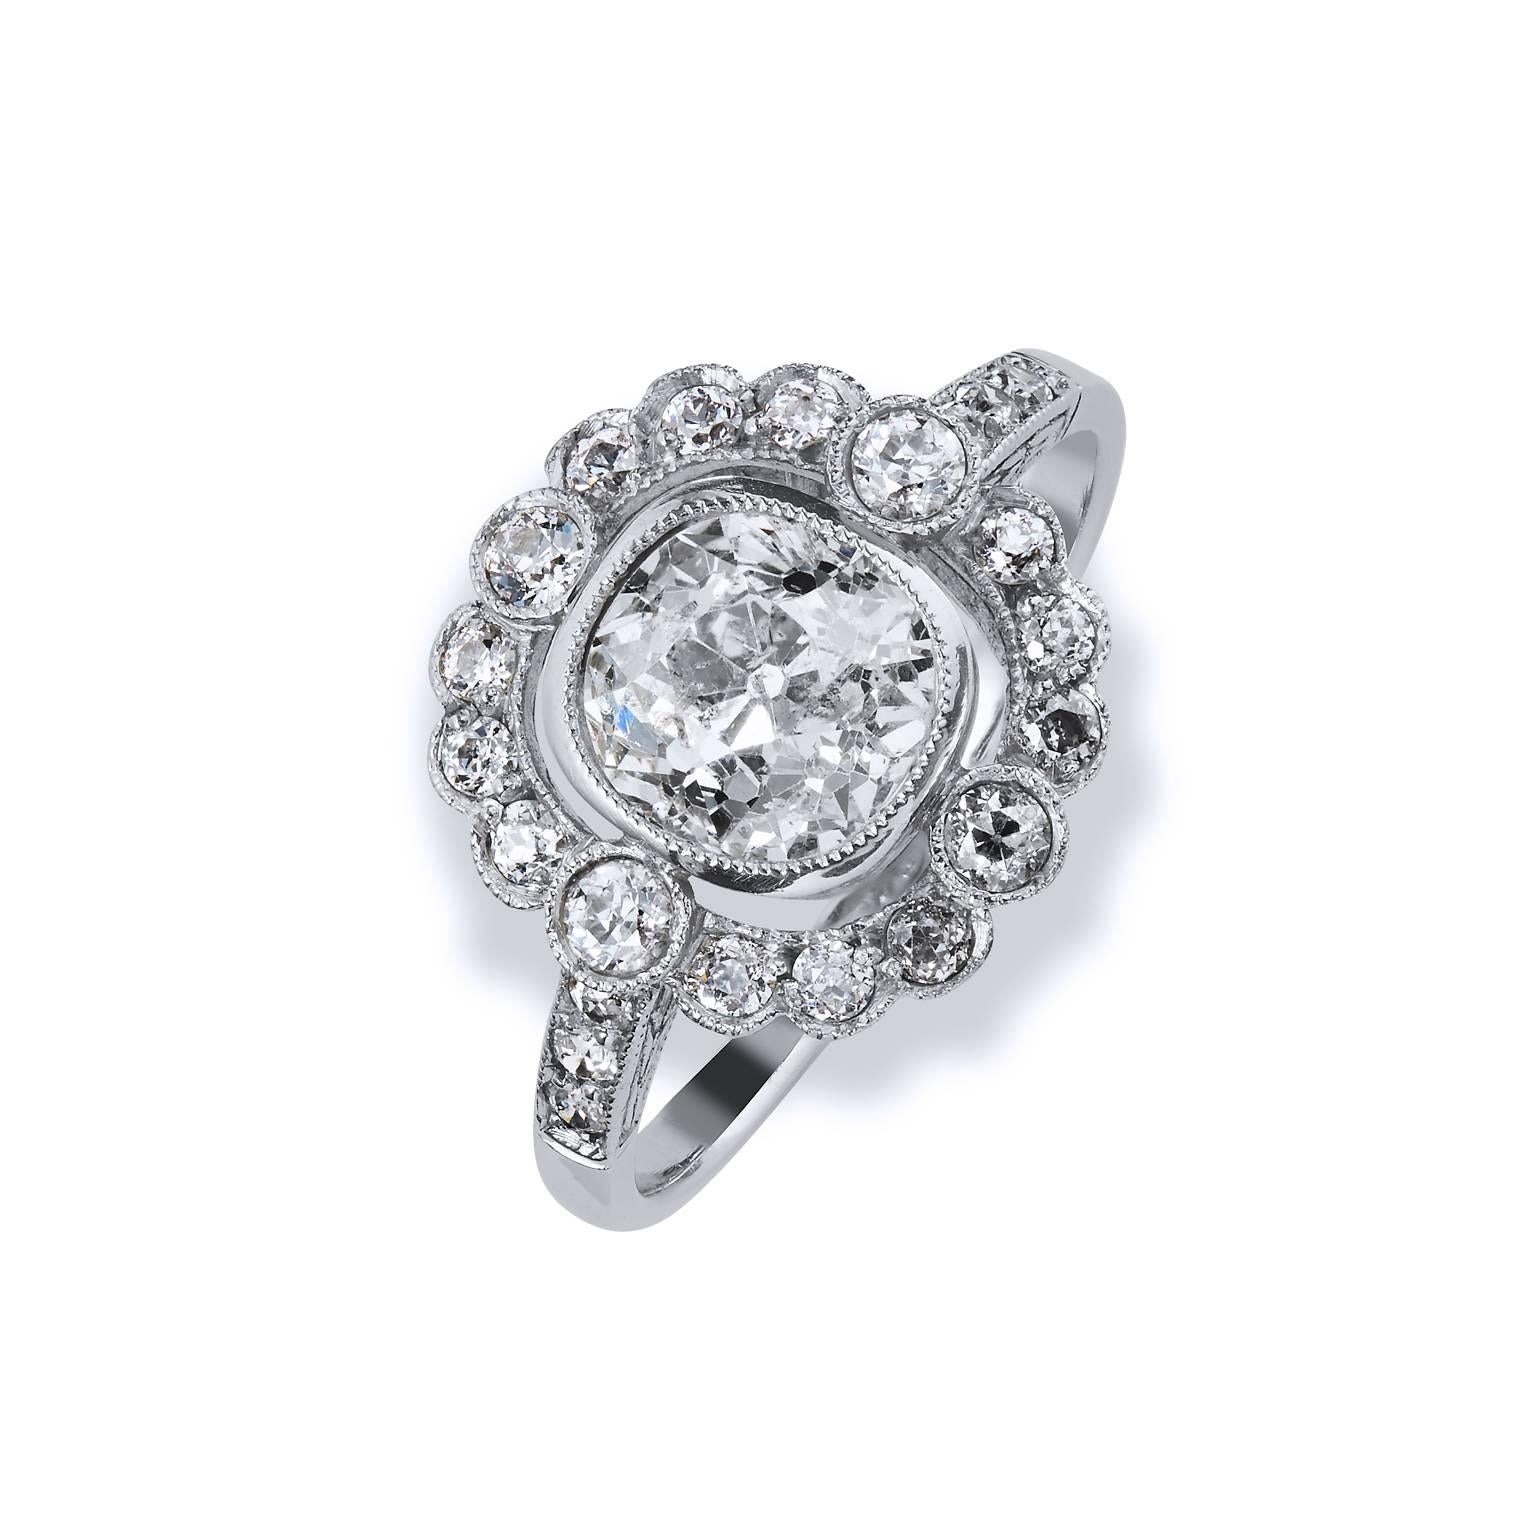 Crafted in platinum, this Art Deco style engagement ring features a 1.39ct old min cut center diamond graded H/I color and I2 clarity. Approximately .55cts’ of bezel set diamonds caress the scintillating center stone and trail down the shank for a